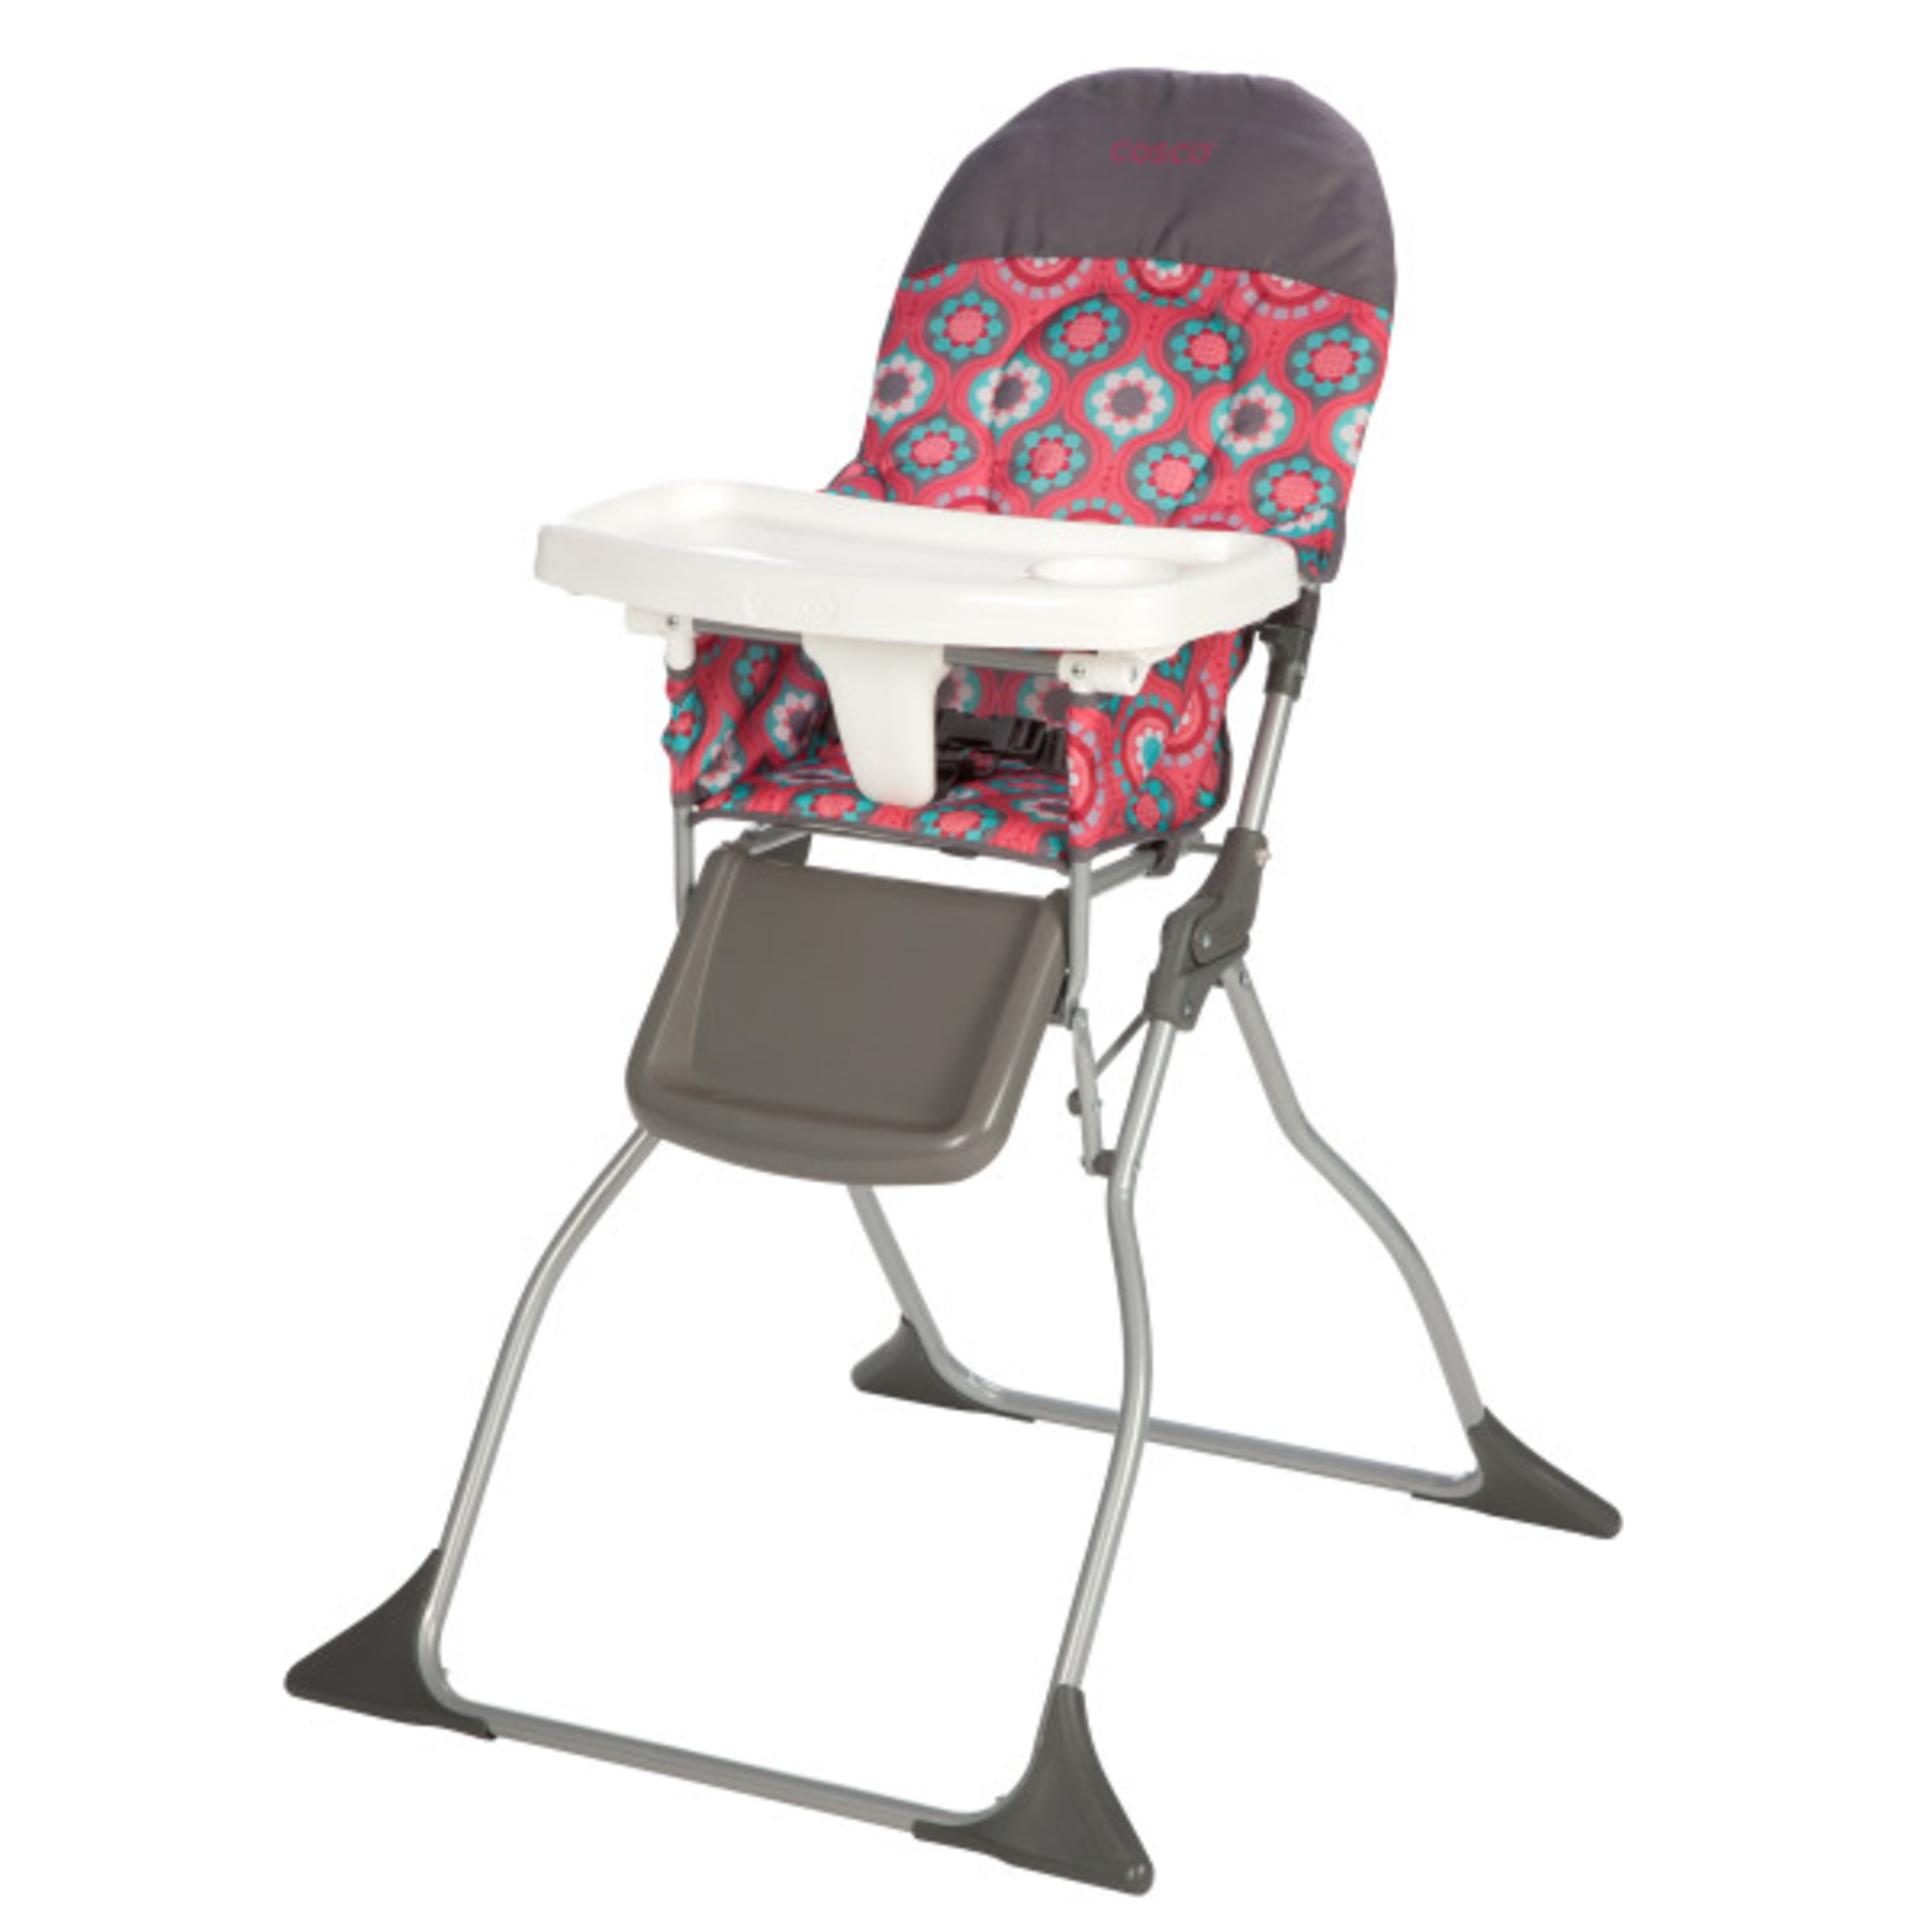 Cosco Kids Simple Fold Full Size High Chair with Adjustable Tray